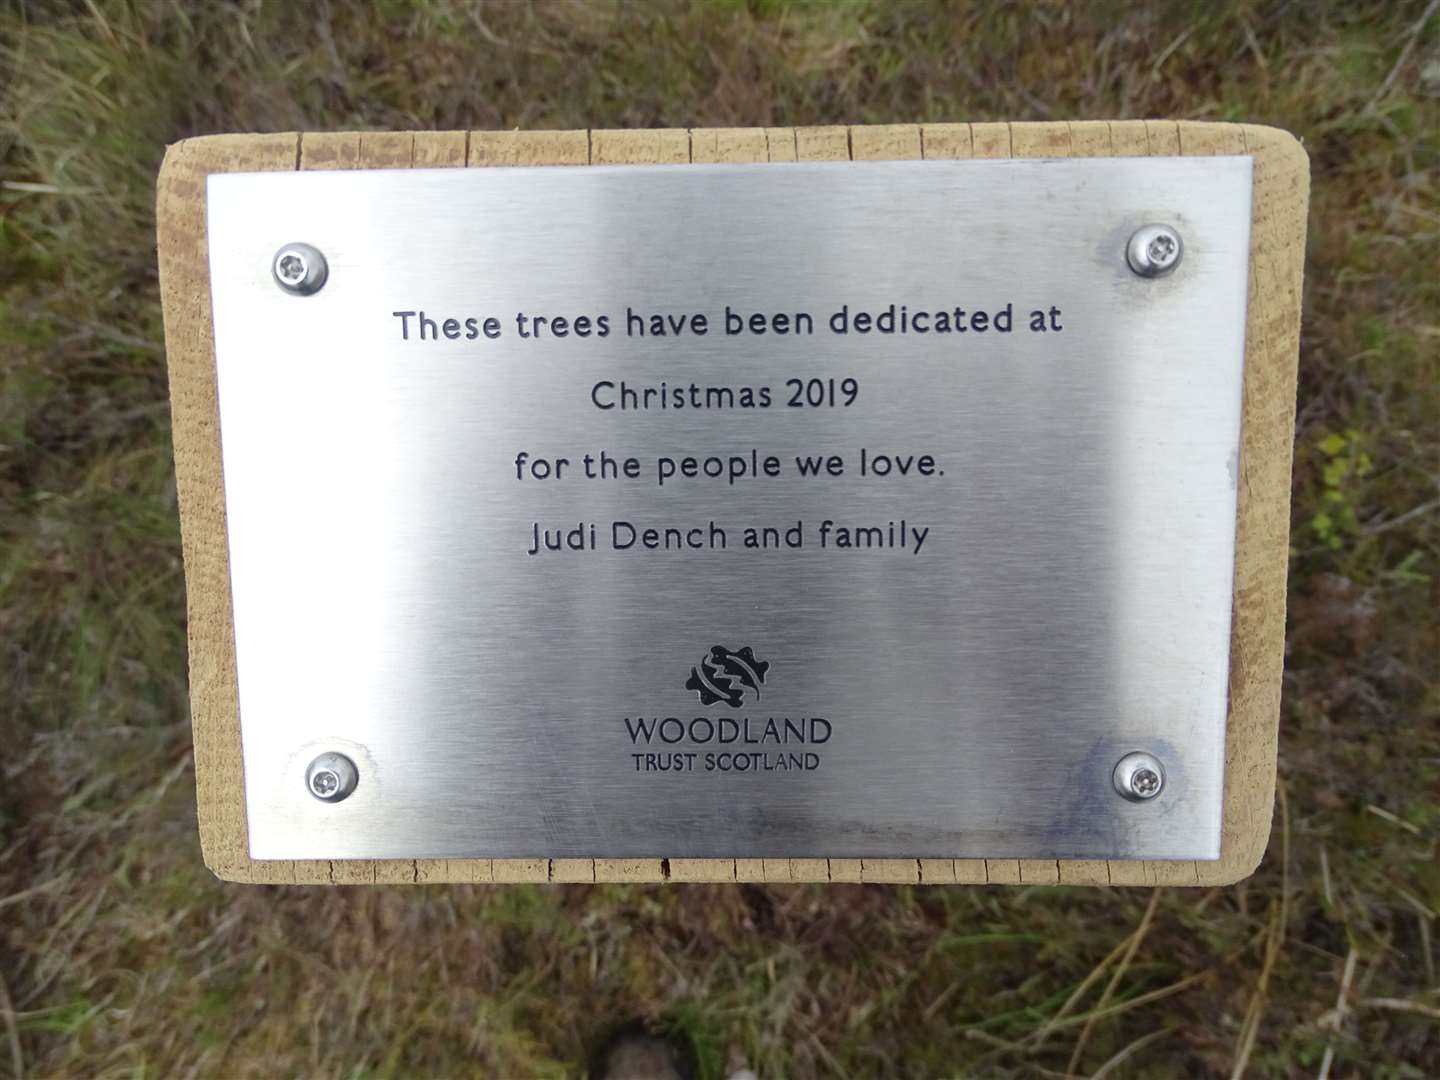 The dedication reads: “These trees have been dedicated at Christmas 2019 for the people we love. Judi Dench and family.”